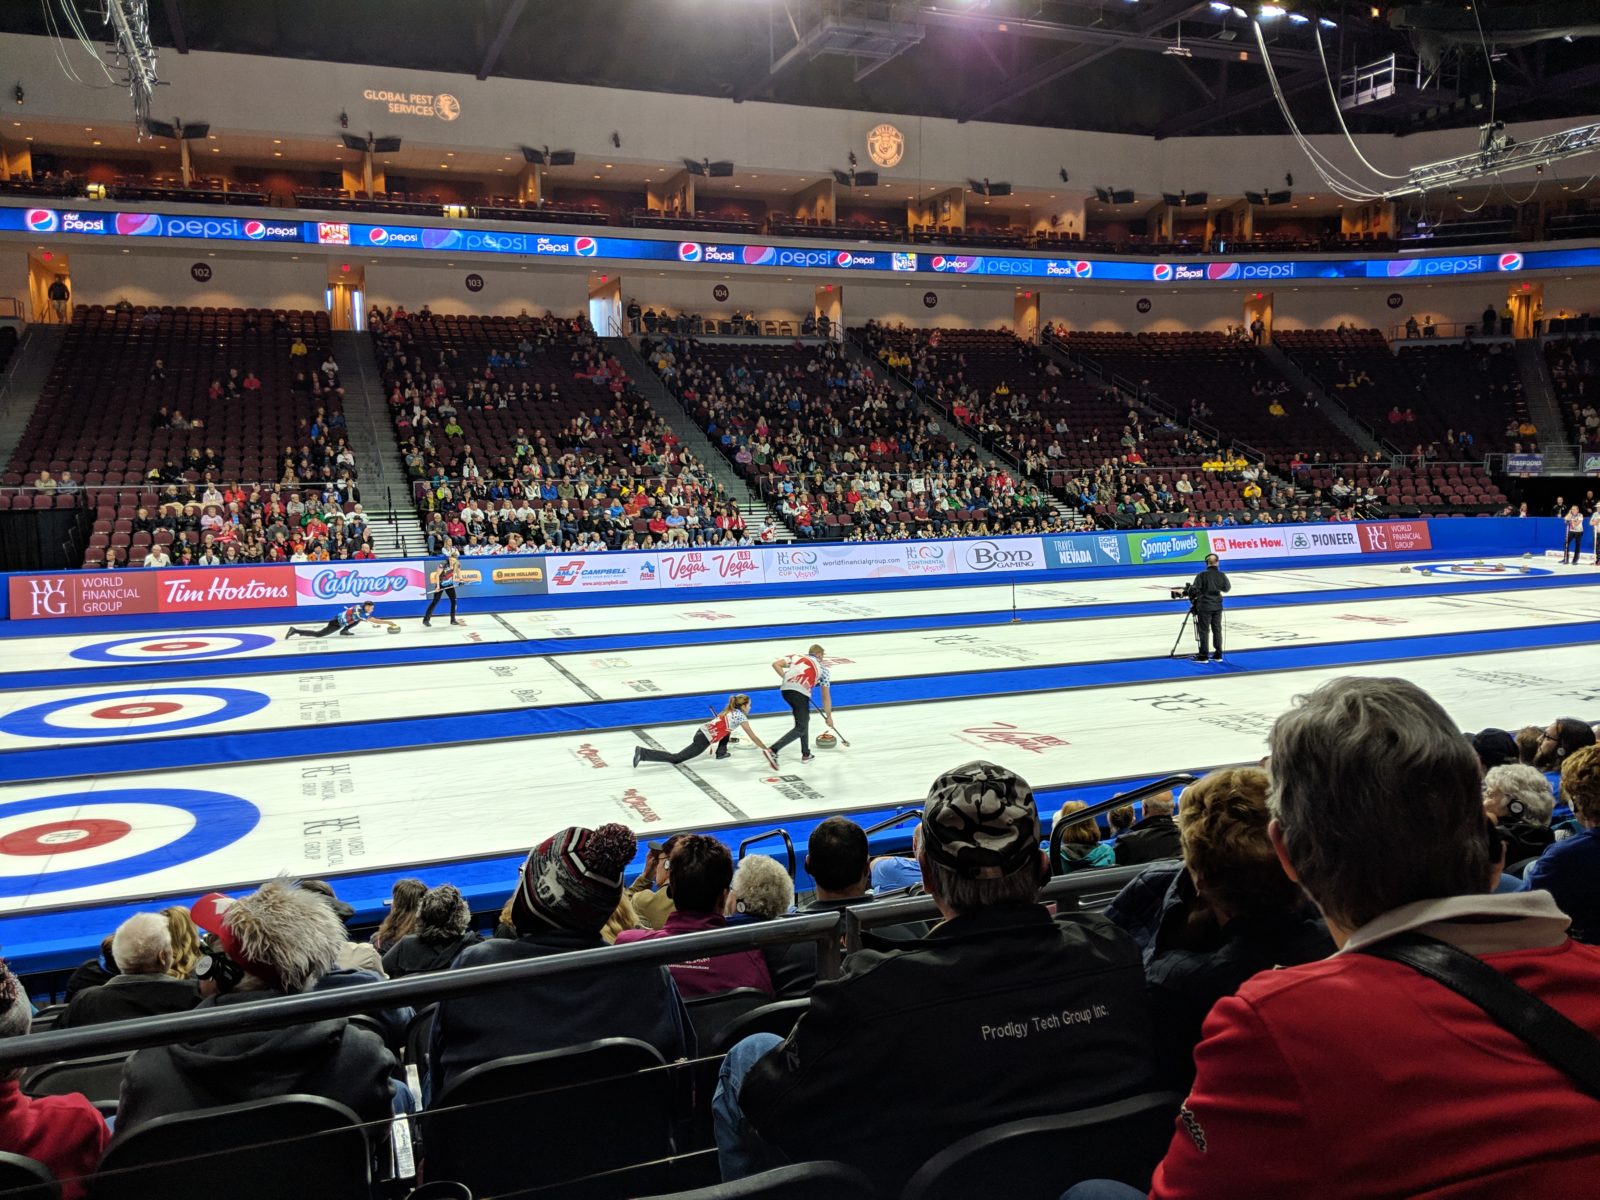 Mixed doubles during Draw 5 of the 2019 Continental Cup in Las Vegas on Friday, Jan. 18, 2019.